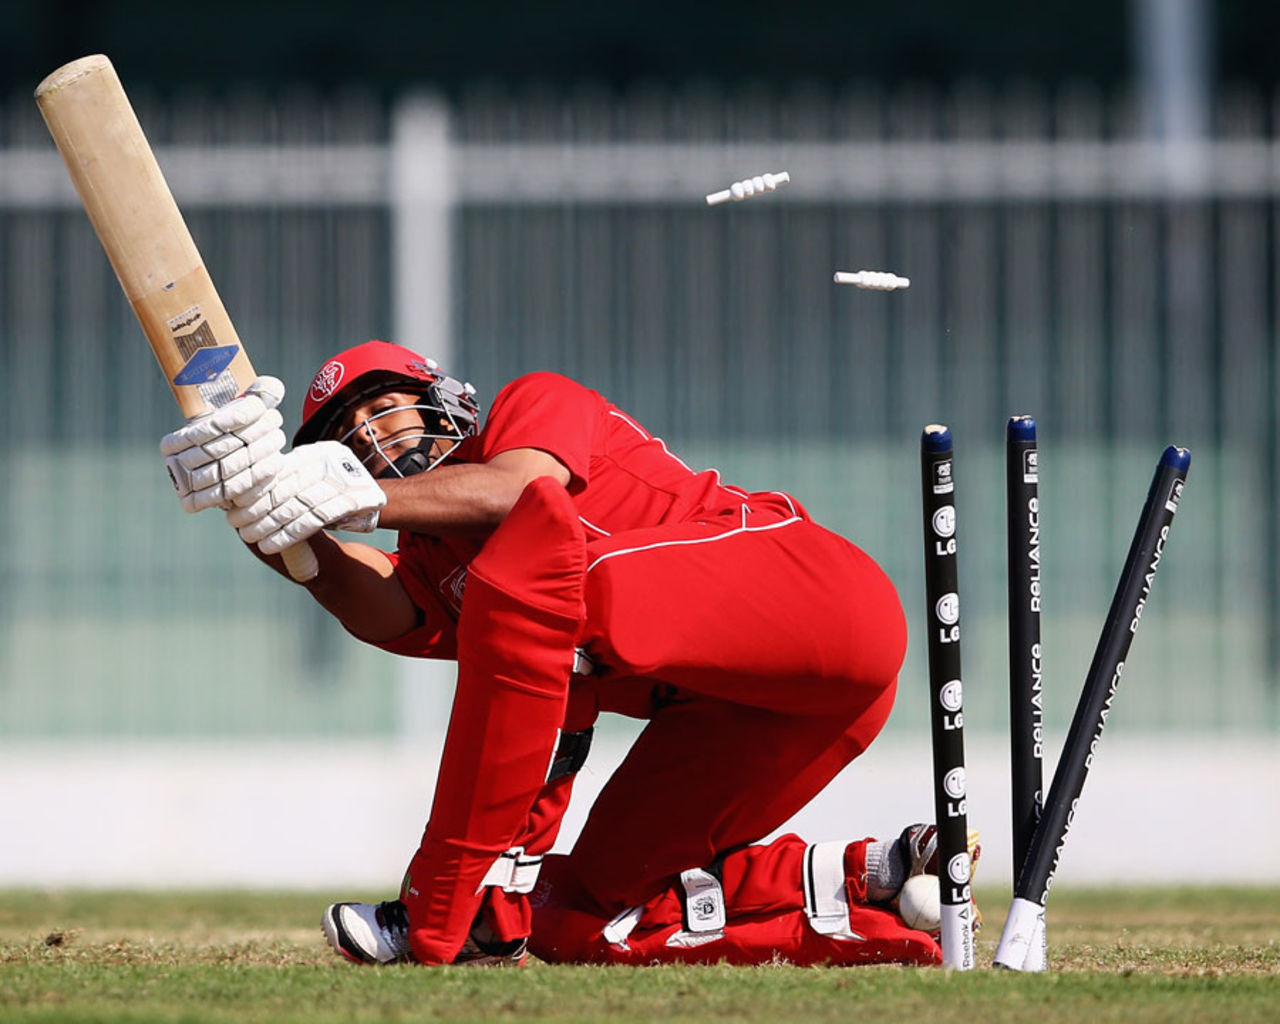 Taha Ahmed was bowled by Imran Awan for 2, United States of America v Denmark, ICC World Twenty20 Qualifier, 15th place play-off, Sharjah, November 26, 2013